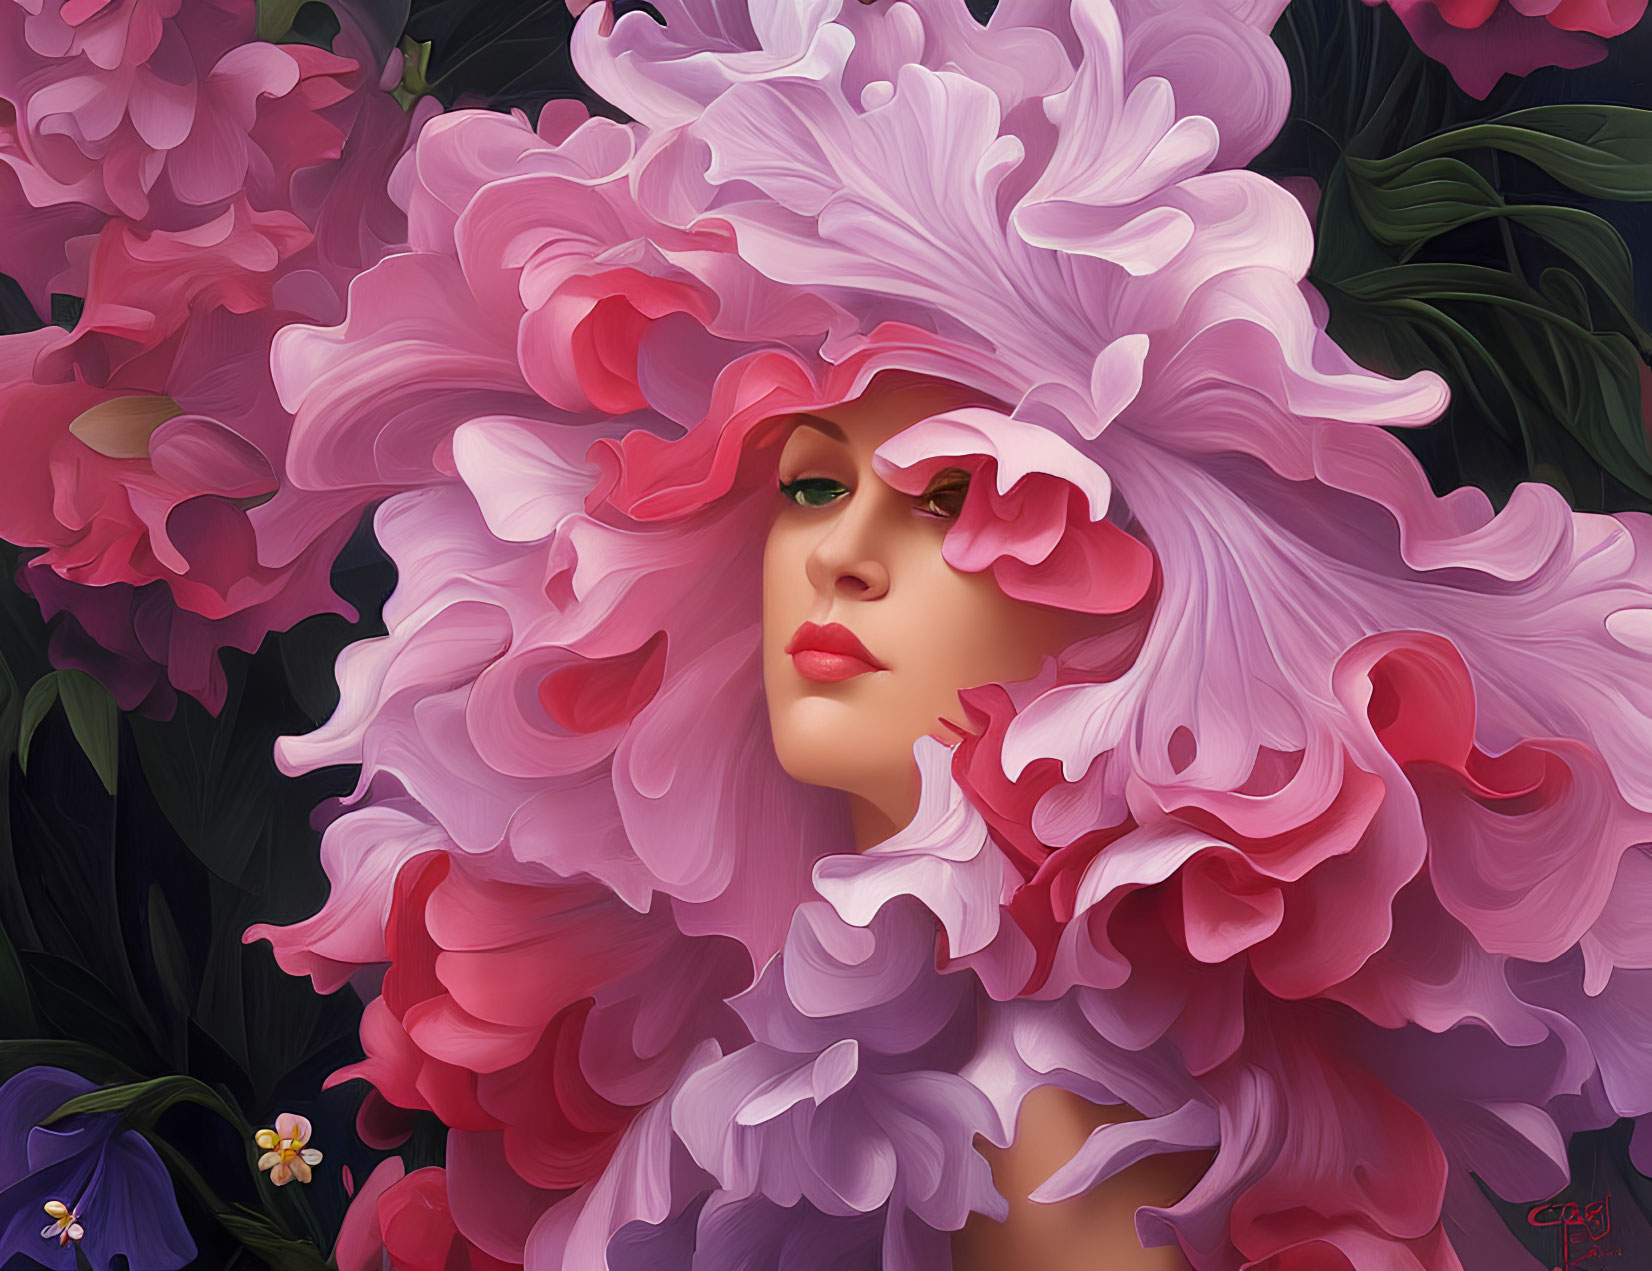 Surreal portrait of woman with voluminous pink hair and floral elements on dark background